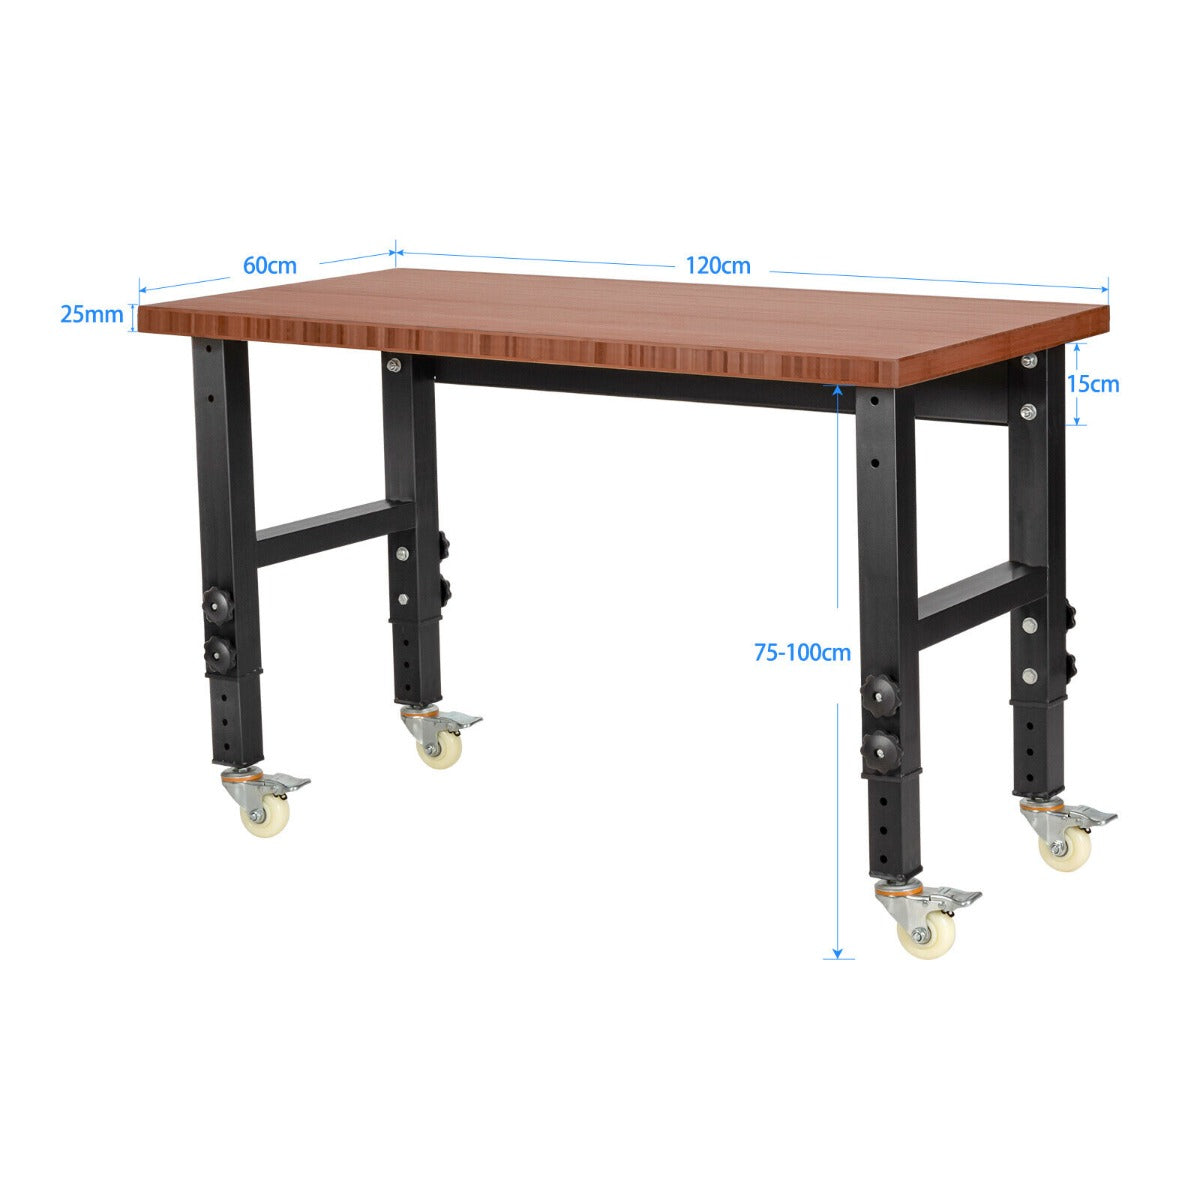 10 Level Height Adjustable Workbench with 4 Lockable Casters-Brown